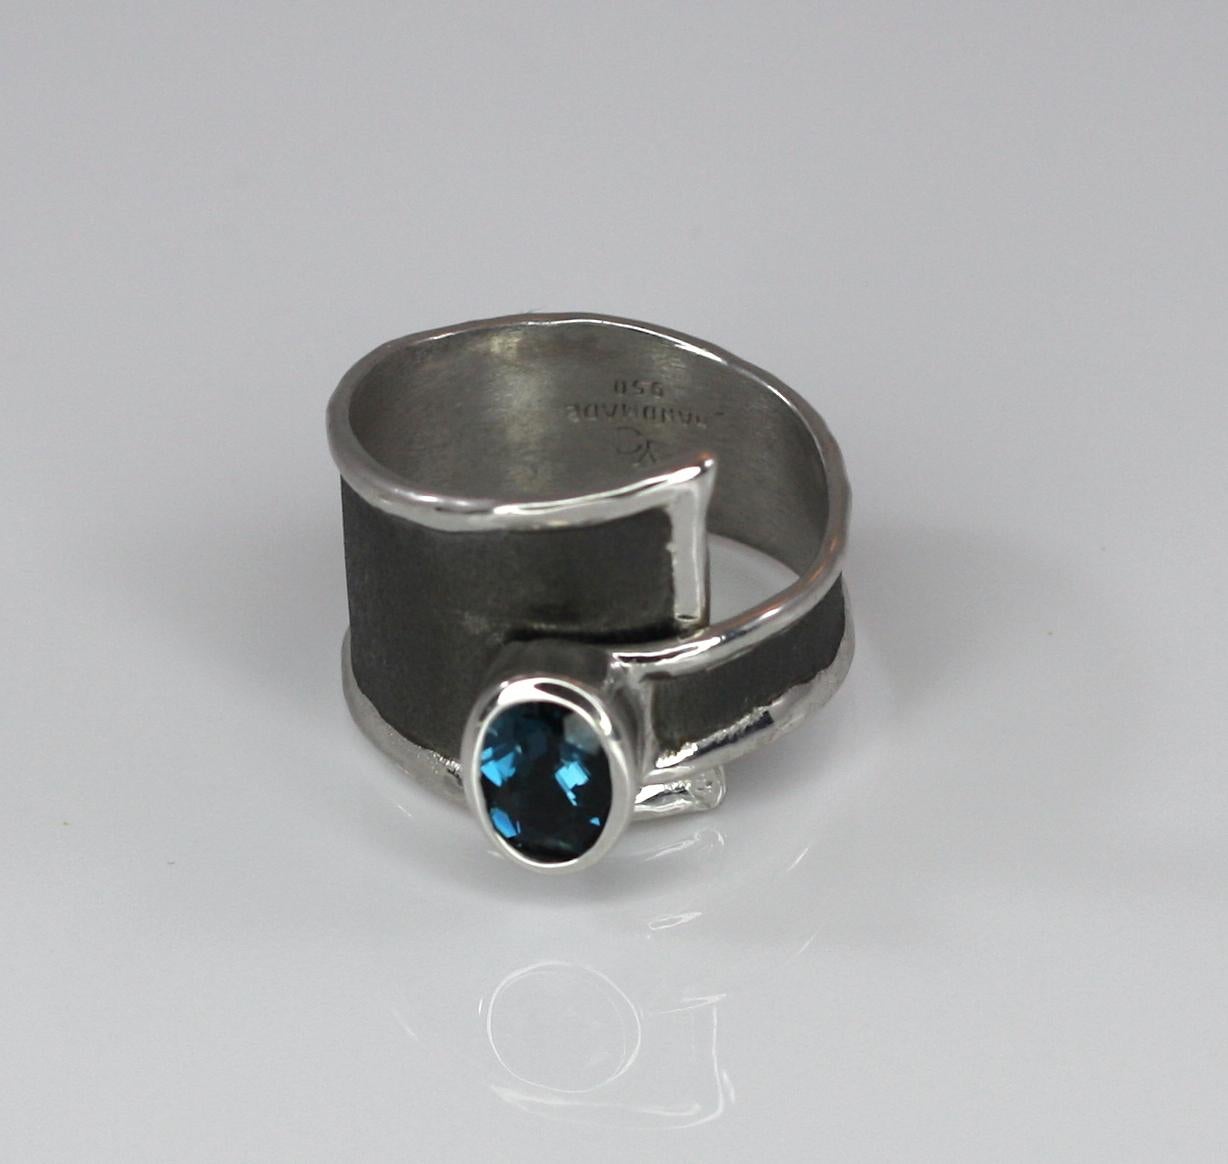 Presenting Unisex Yianni Creations handmade artisan ring from fine silver 950 purity, plated with palladium to resist the elements. This ring is from the Hephestos Collection where the brushed background is finished with Black Rhodium. This